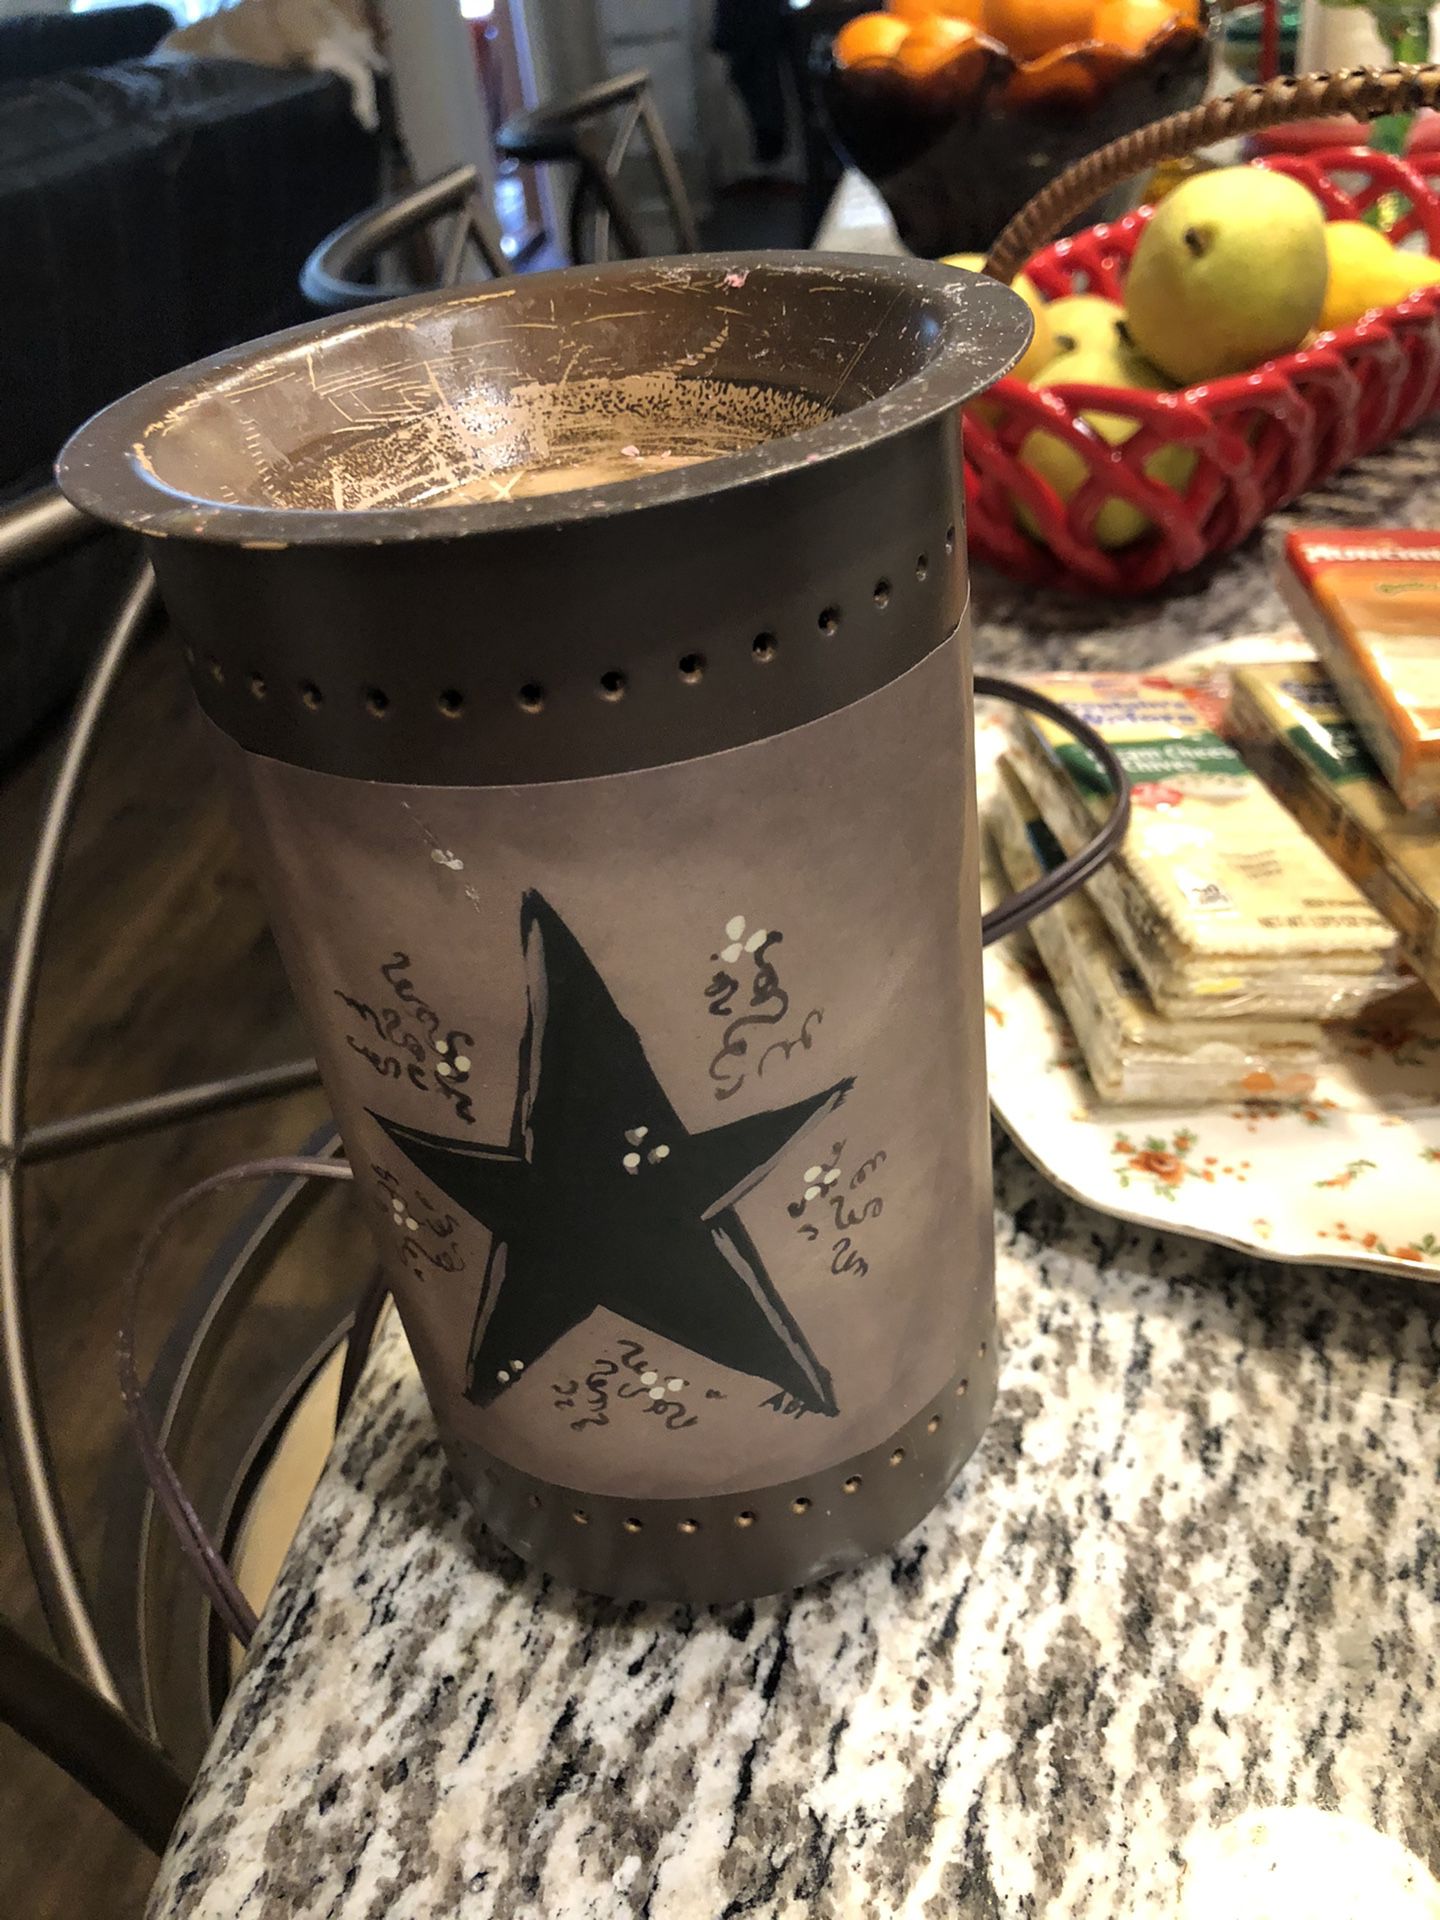 Texas Star Rustic Scentsy wax melter